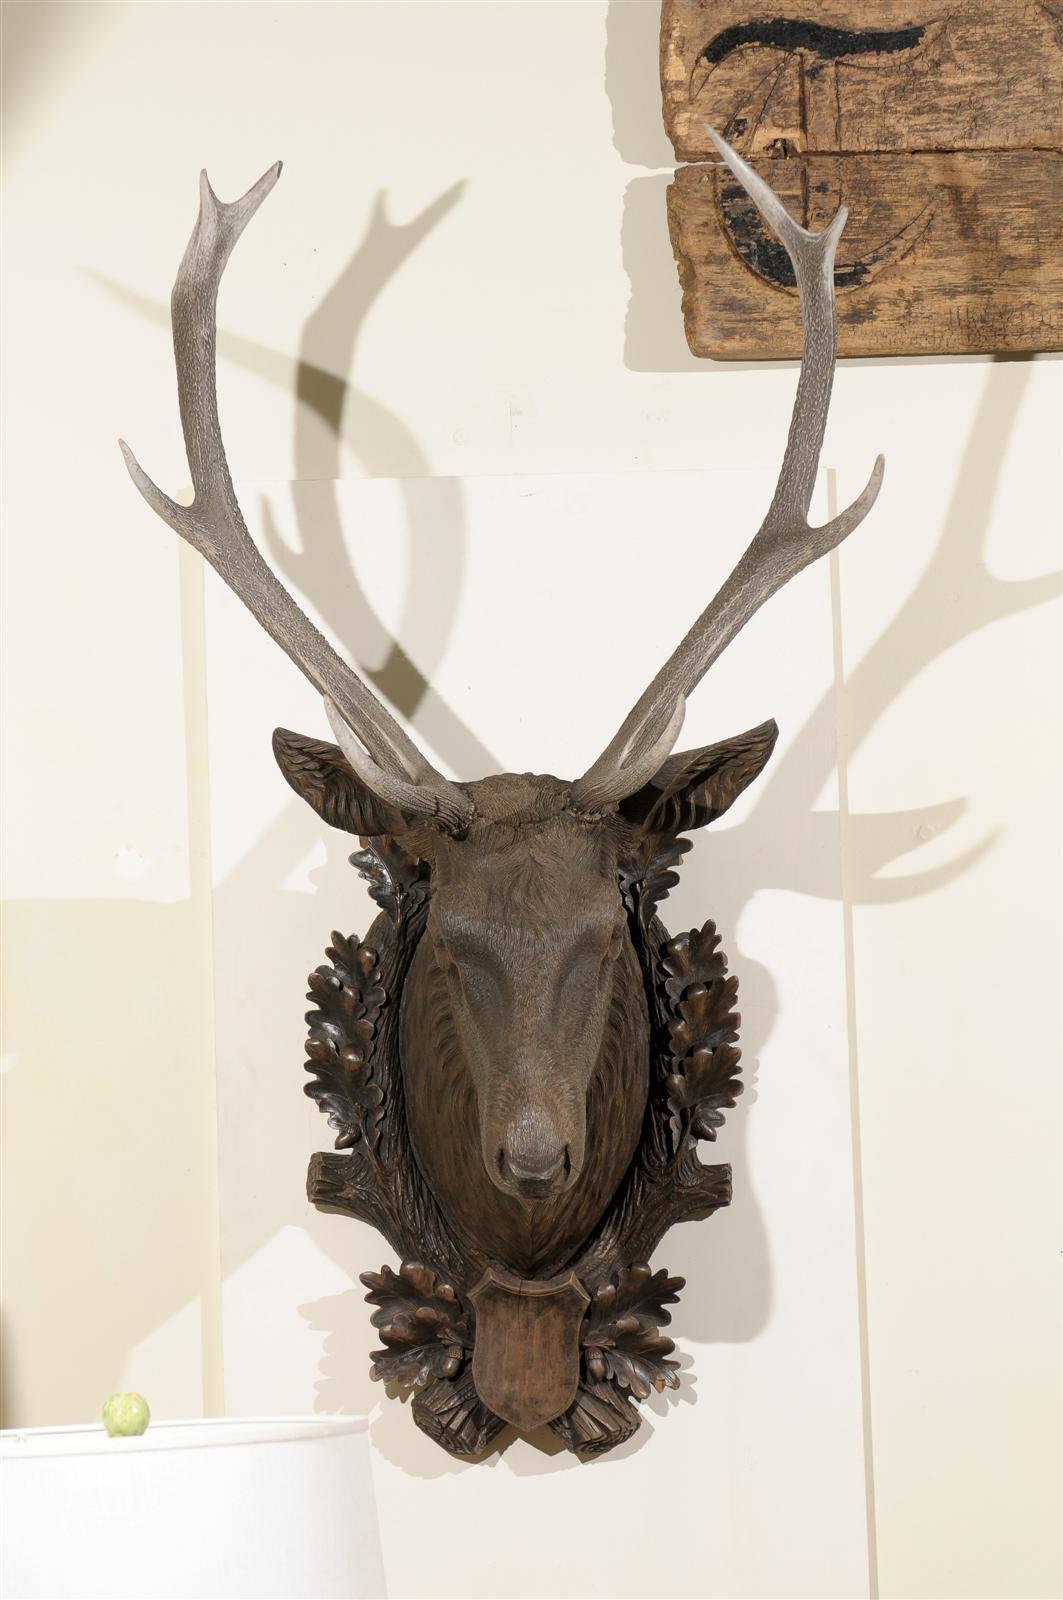 In the 1800s in Switzerland carvers were interested in carving things related to the outdoors such as hunting, skiing and wildlife. A stag head of this size is very rare and hard to come by. The oak wreath around the neck of the stag represents a